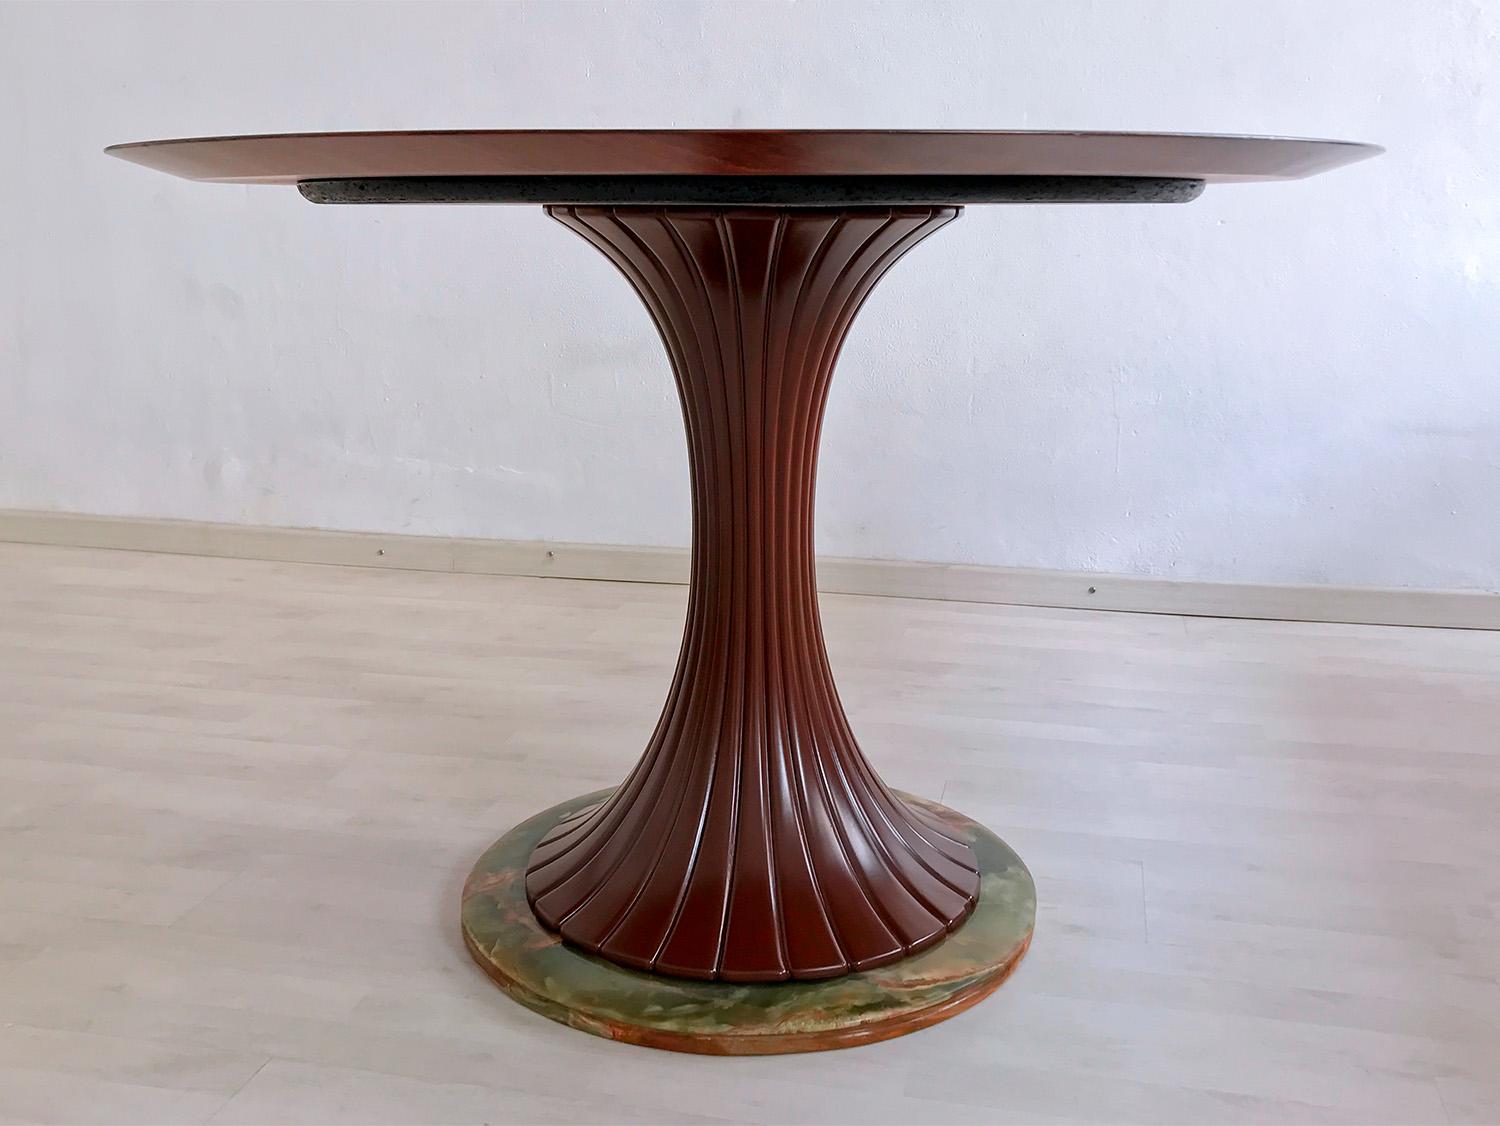 Dining table well designed by Vittorio Dassi in the 1950s, very stylish and charming as all the items manufactured by him.
The round tabletop is teak wood and its base made of precious green Pakistan onyx, rare stone chosen by the most important